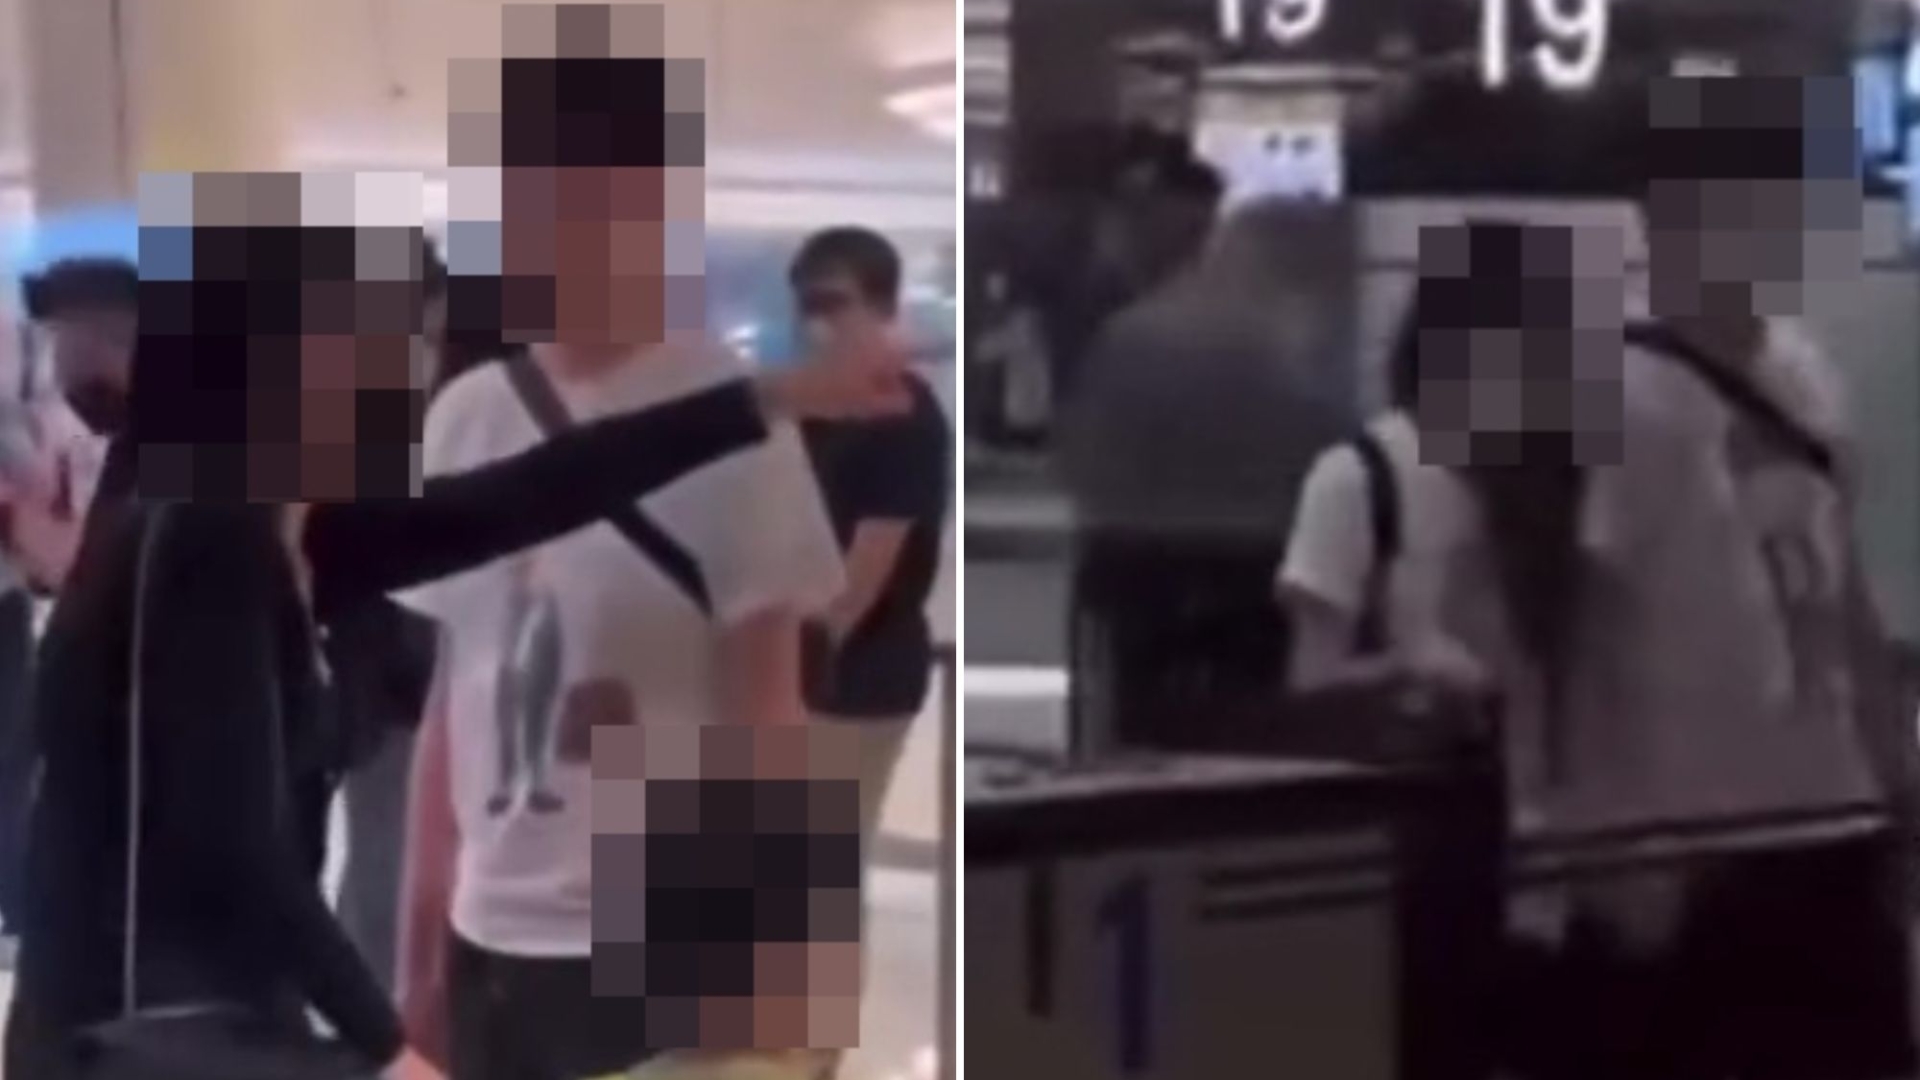 Watch fuming wife bust cheating husband at airport hand-in-hand with ‘mistress’ returning from Thailand getaway